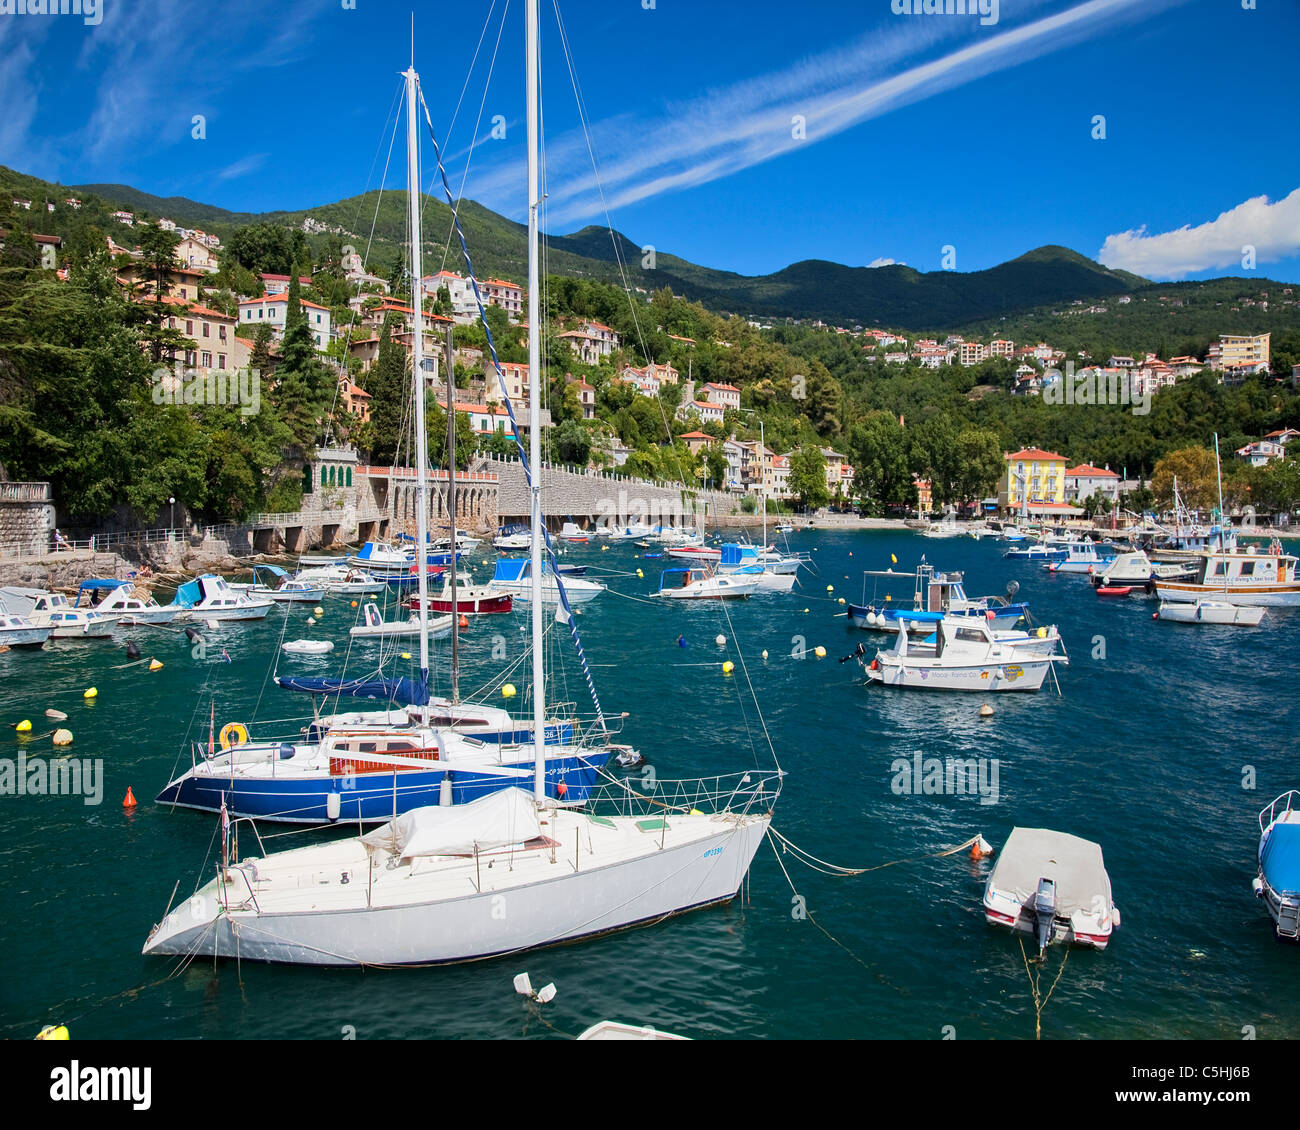 HR - GULF OF KVAMER: The small Fishing Village and Harbour of Ika near Opatija Stock Photo